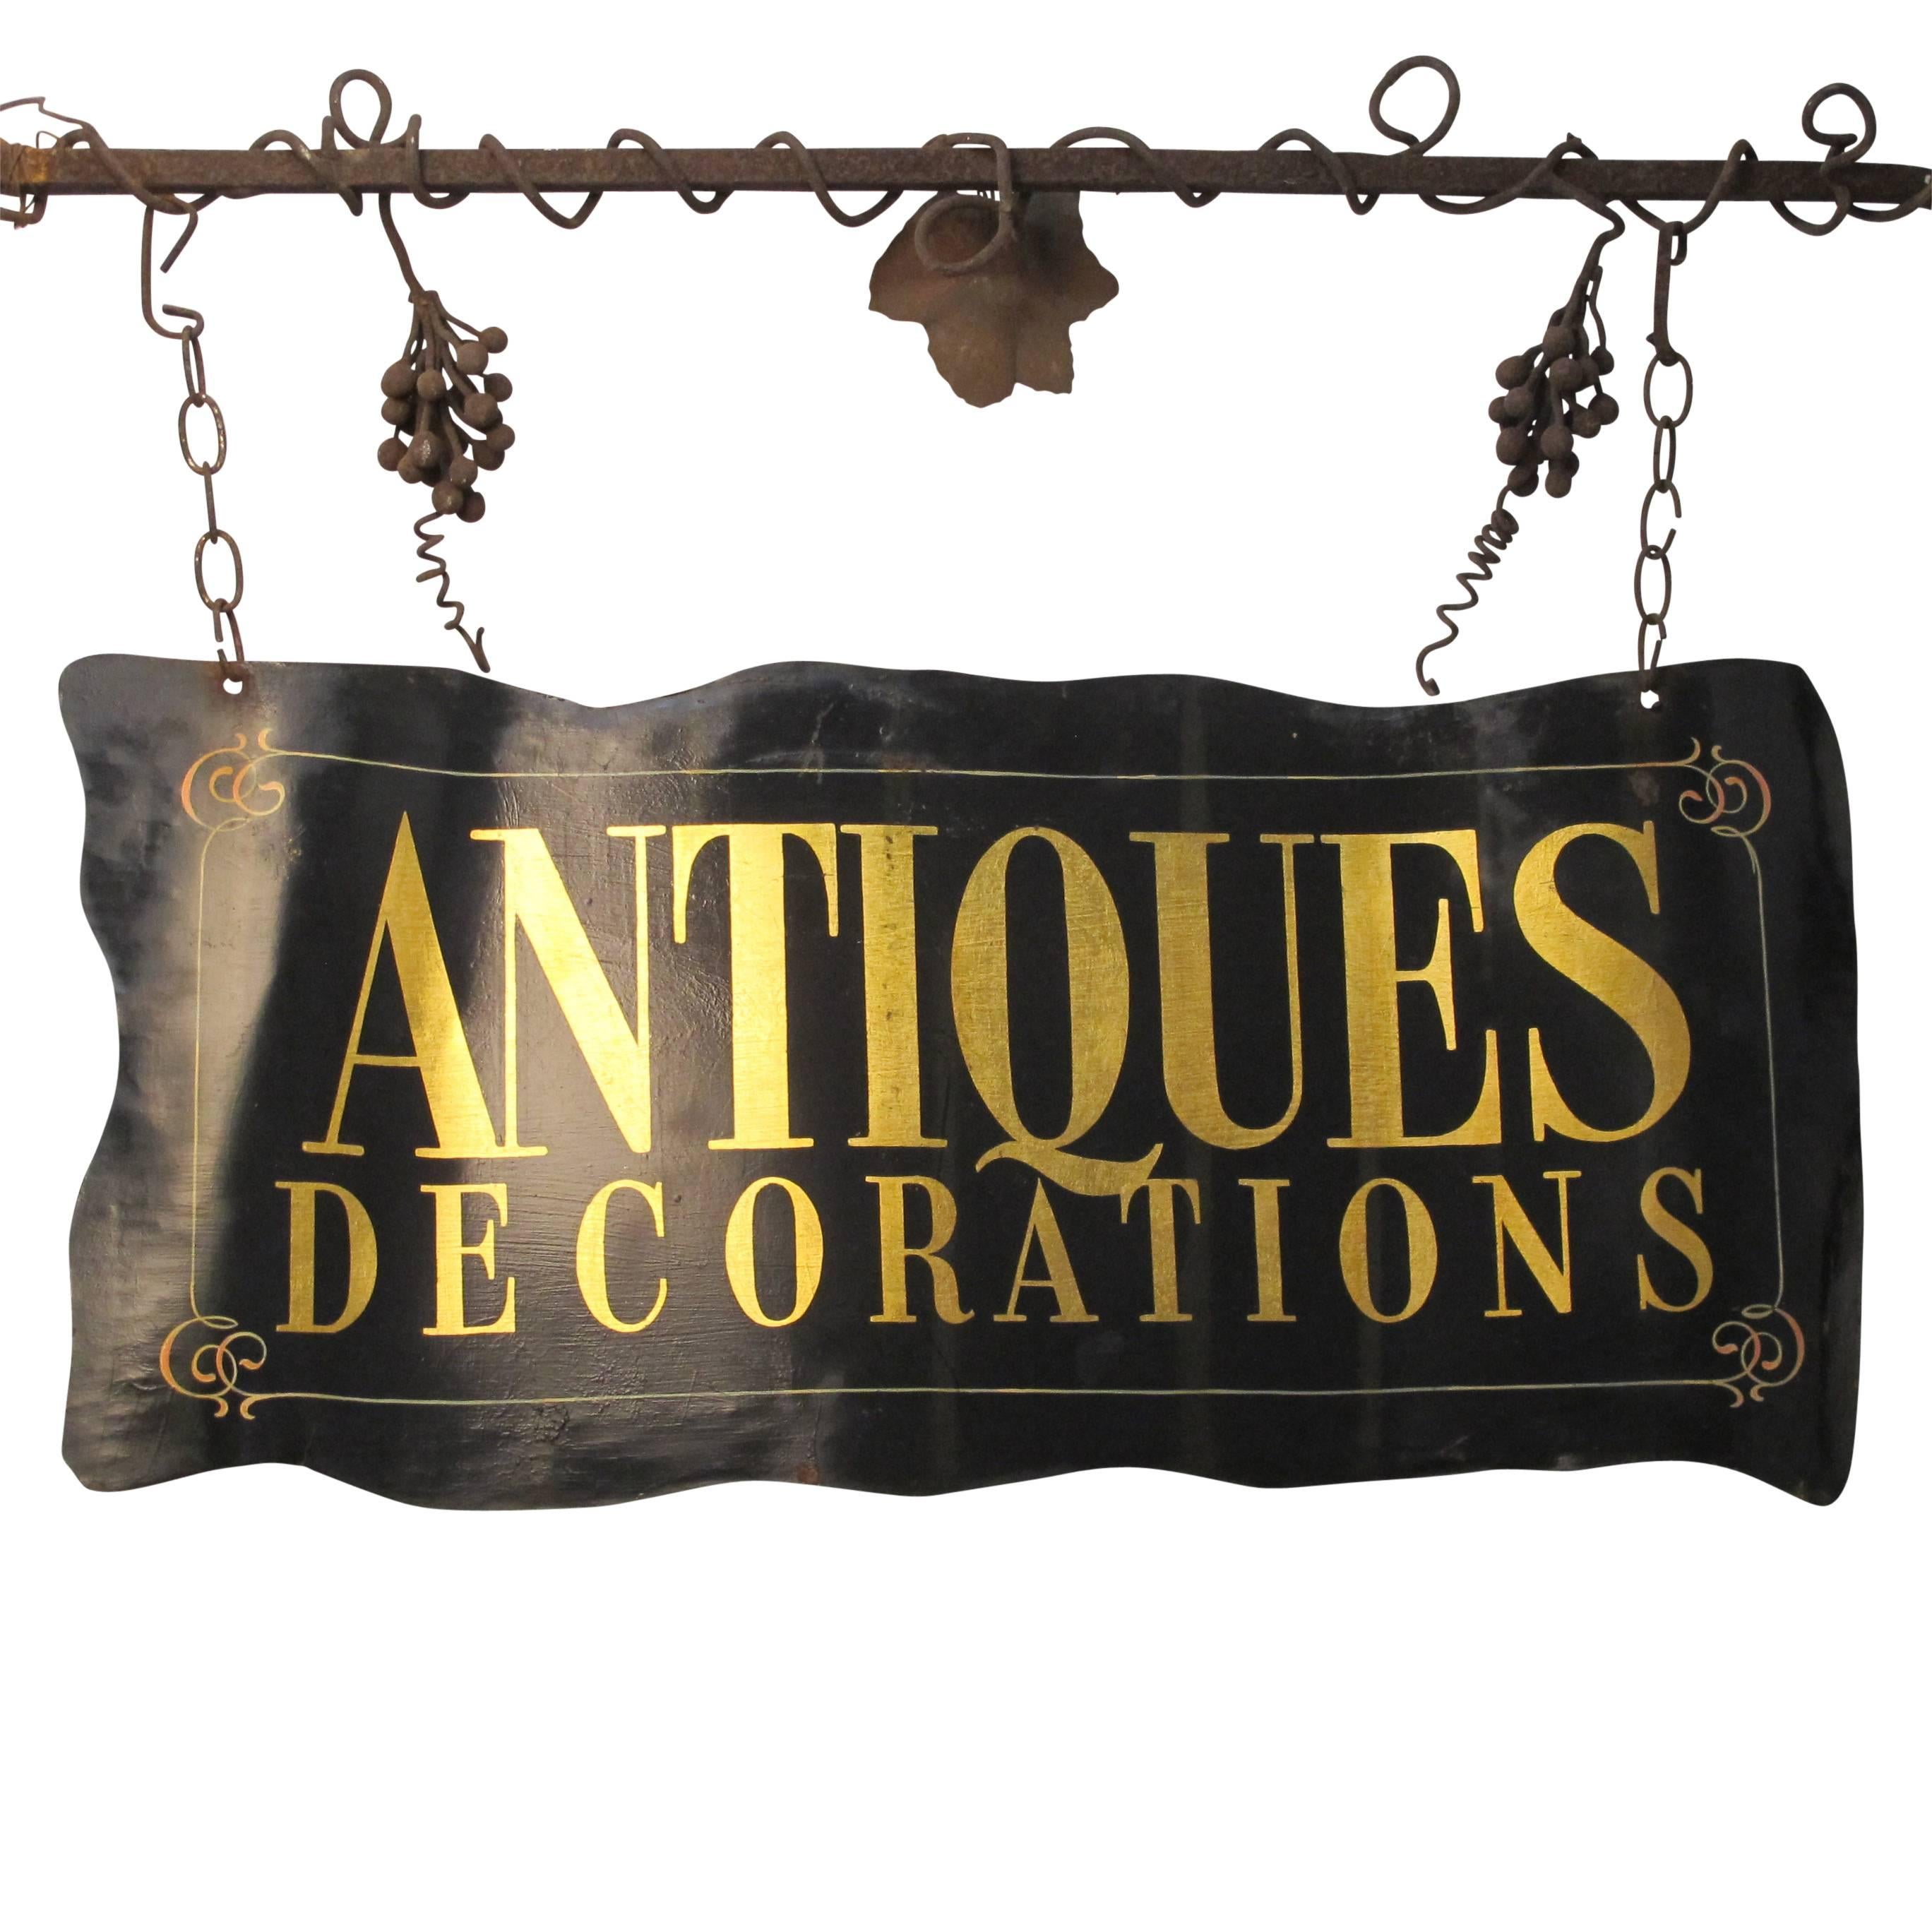 Hand-Crafted Wrought Iron and Tole Painted Antiques Trade Sign